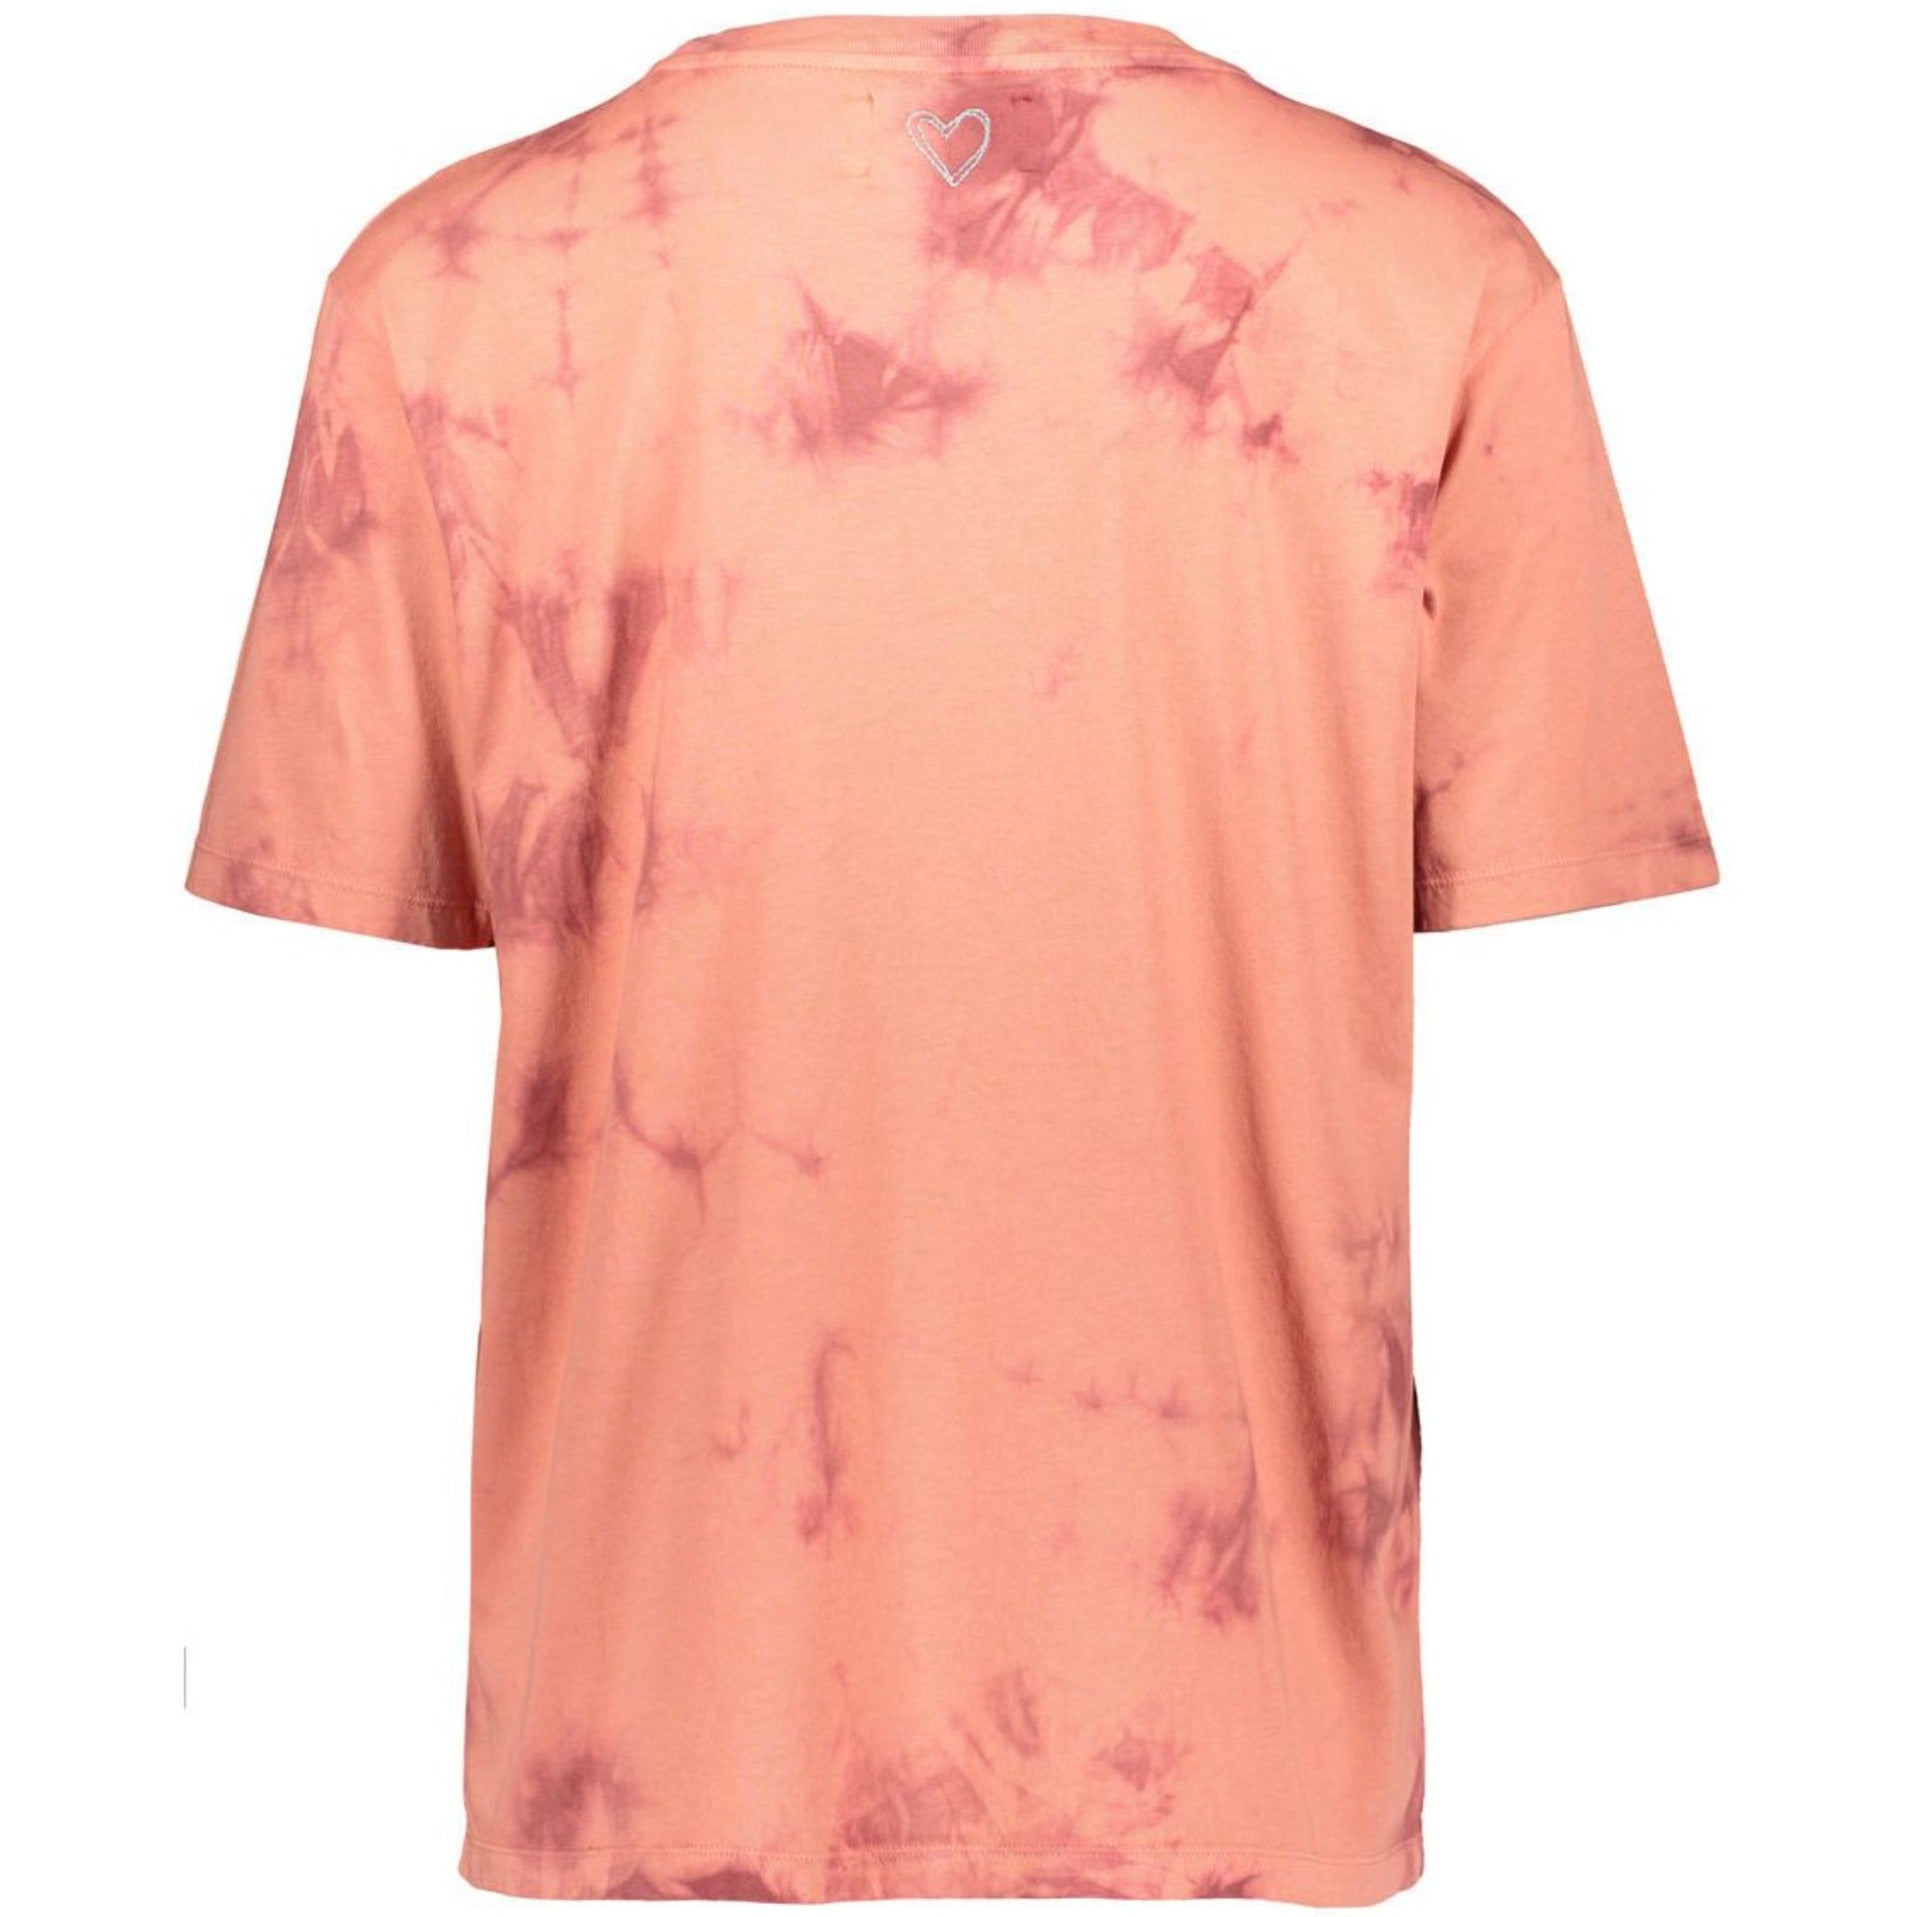 Another Brand T-Shirt "Tie Dye"